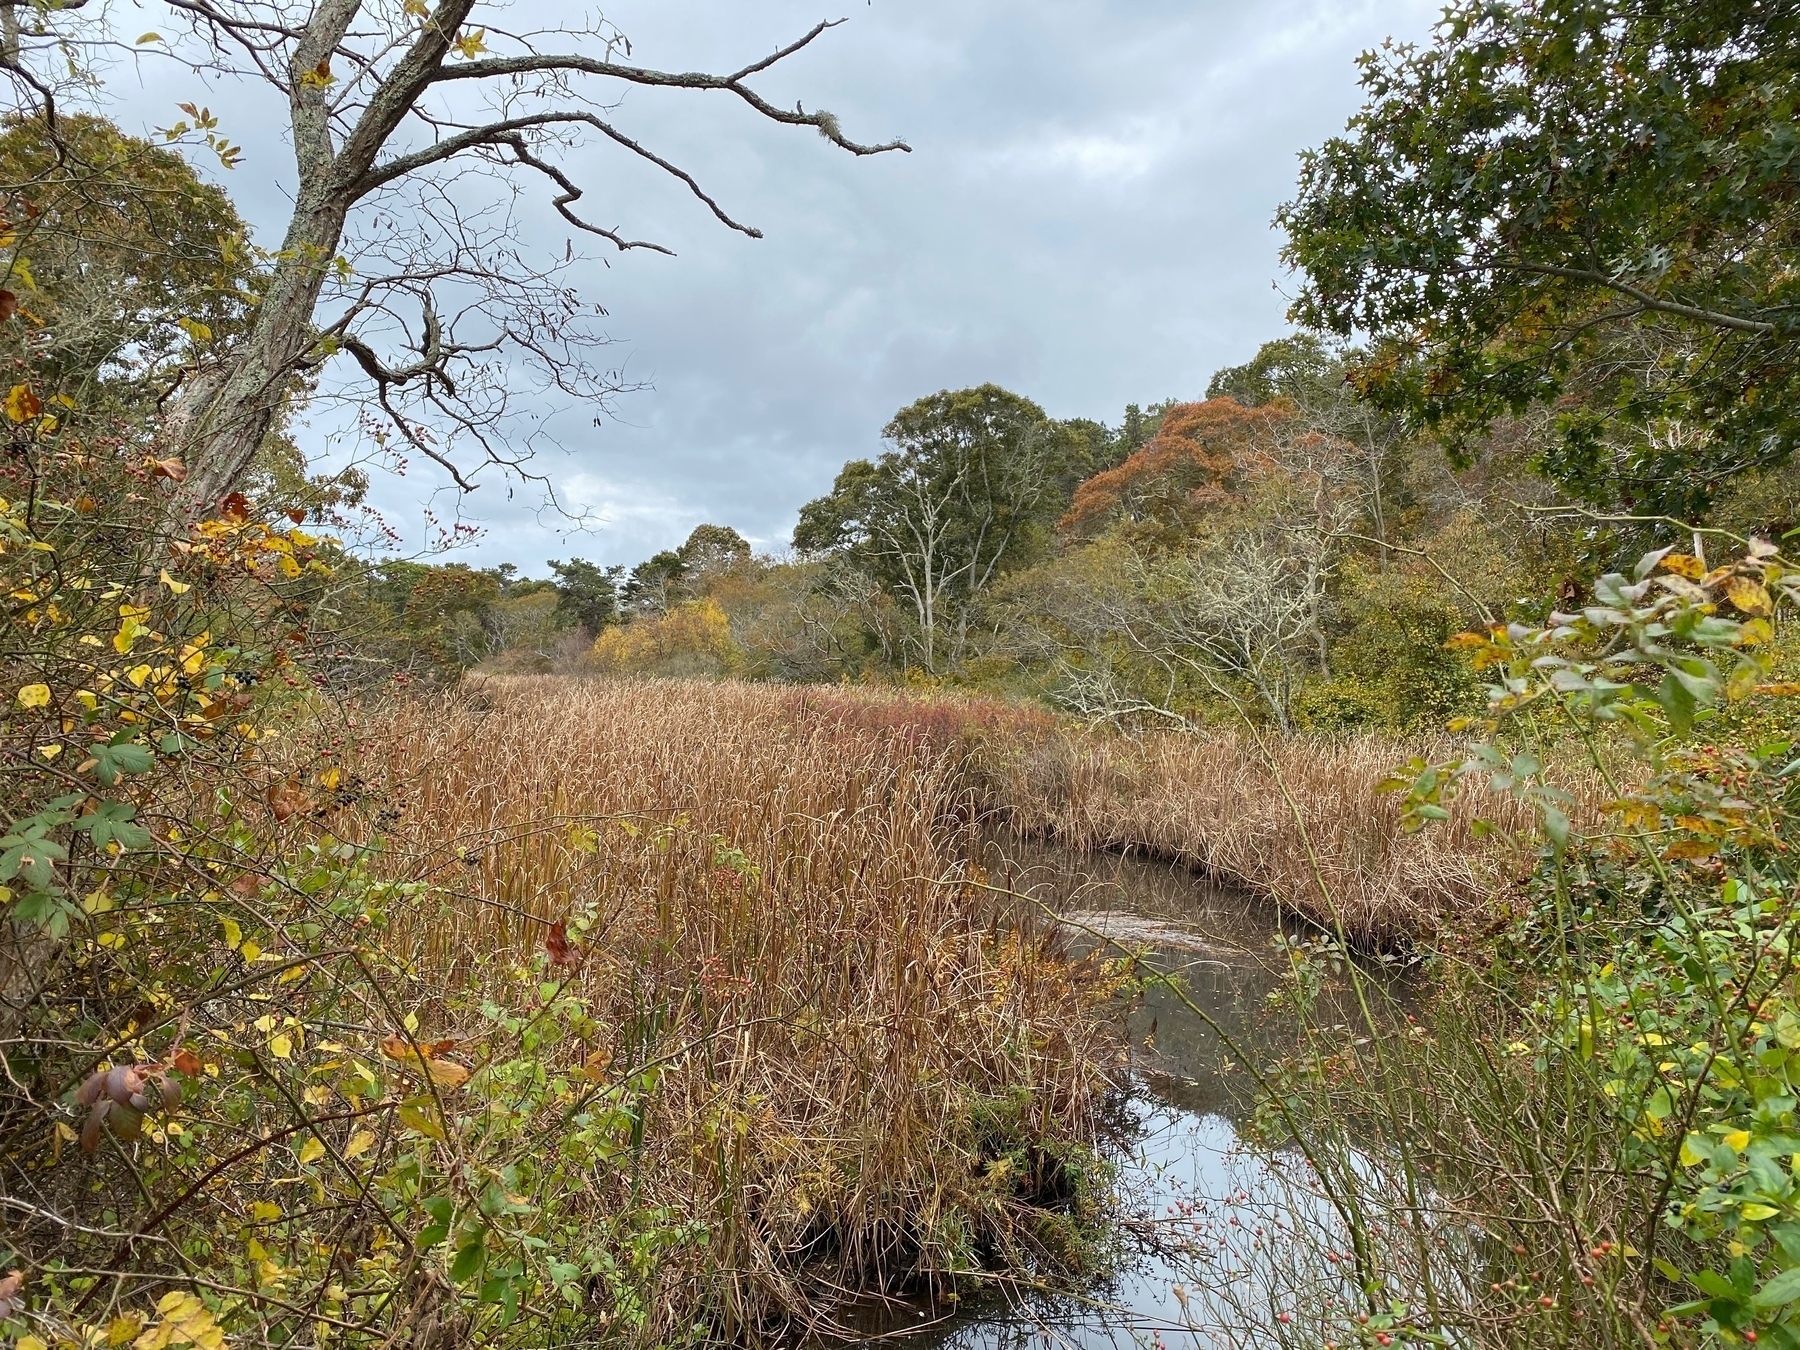 View of a salt marsh with a stream though the reeds, trees set back from the bank, and a gray cloudy sky above.